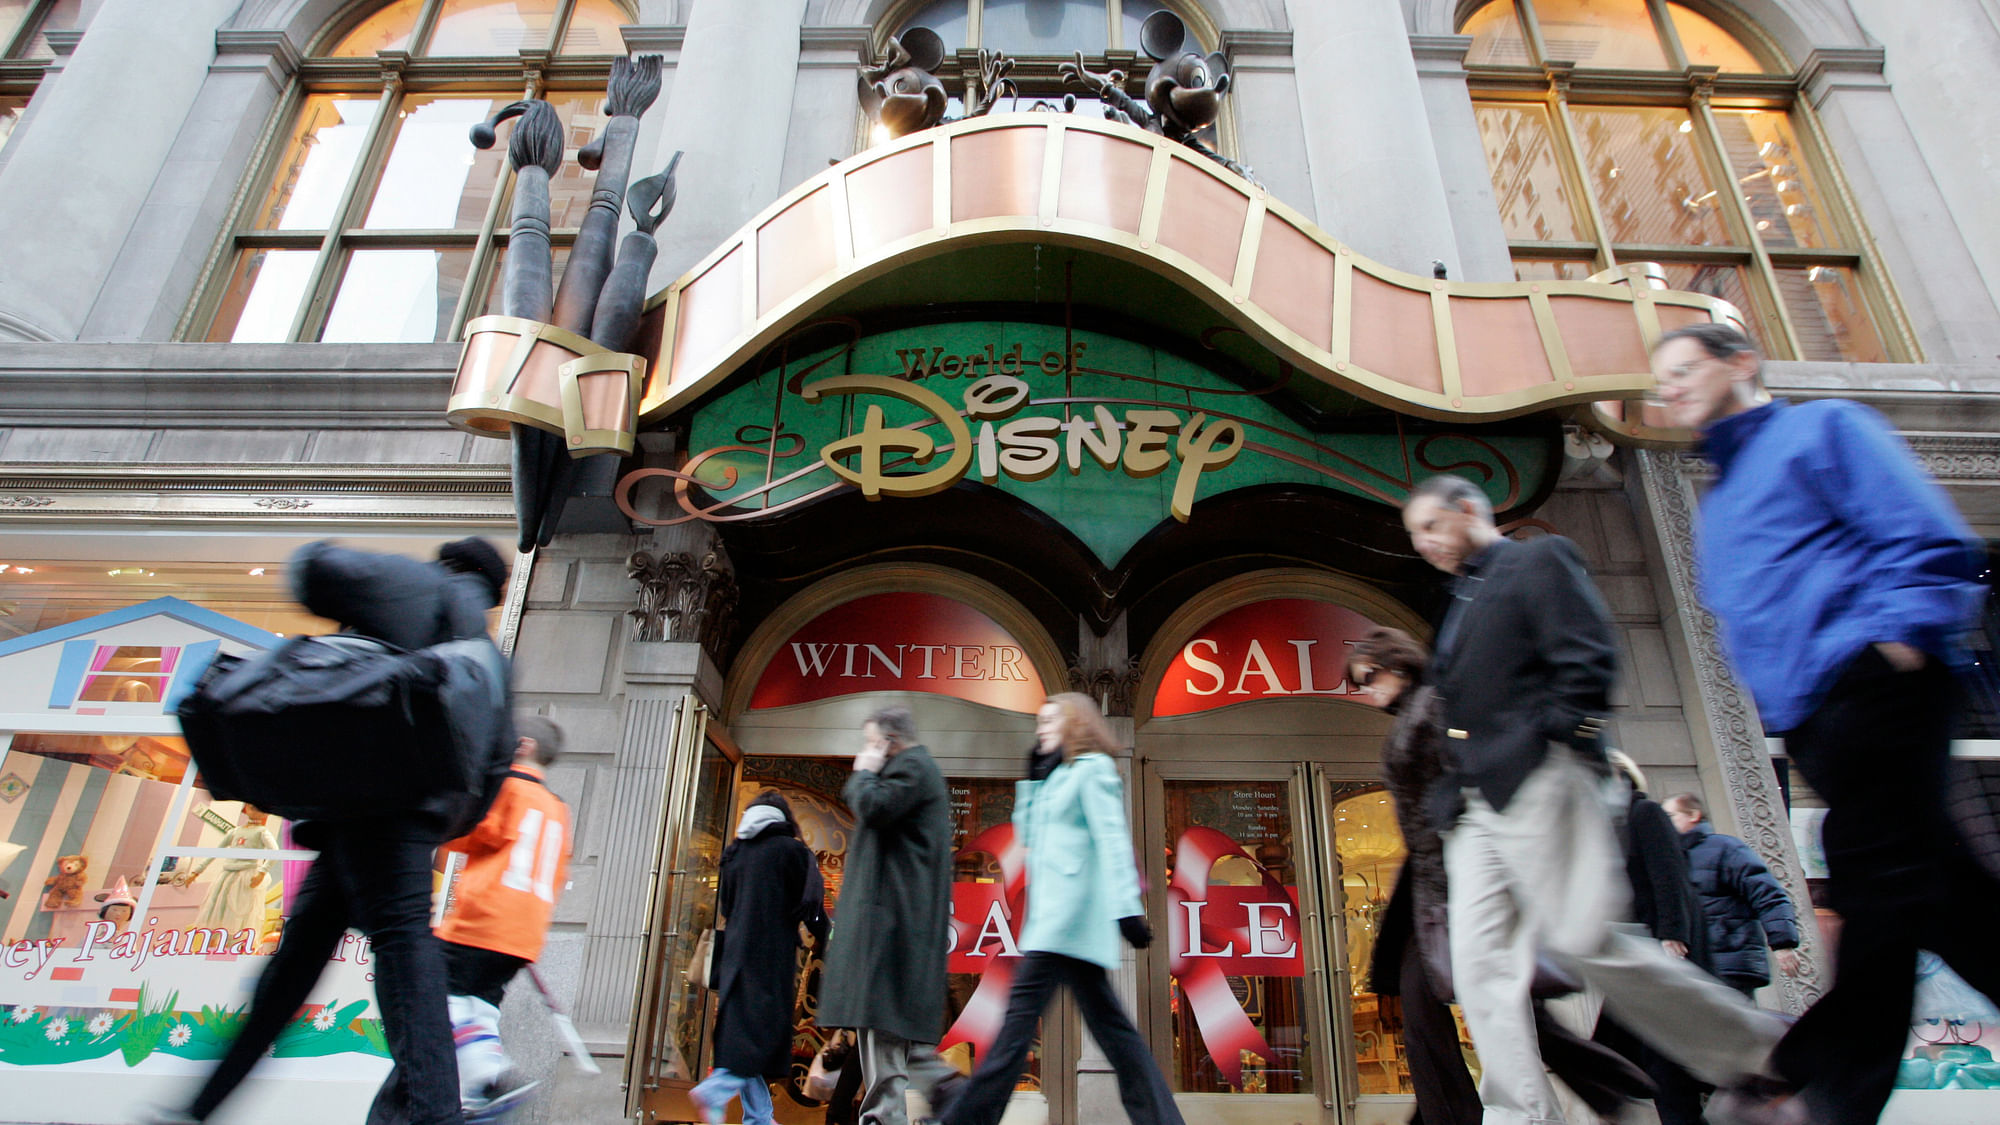 Passers-by walk in front of the World of Disney store in New York. (Photo: Reuters)